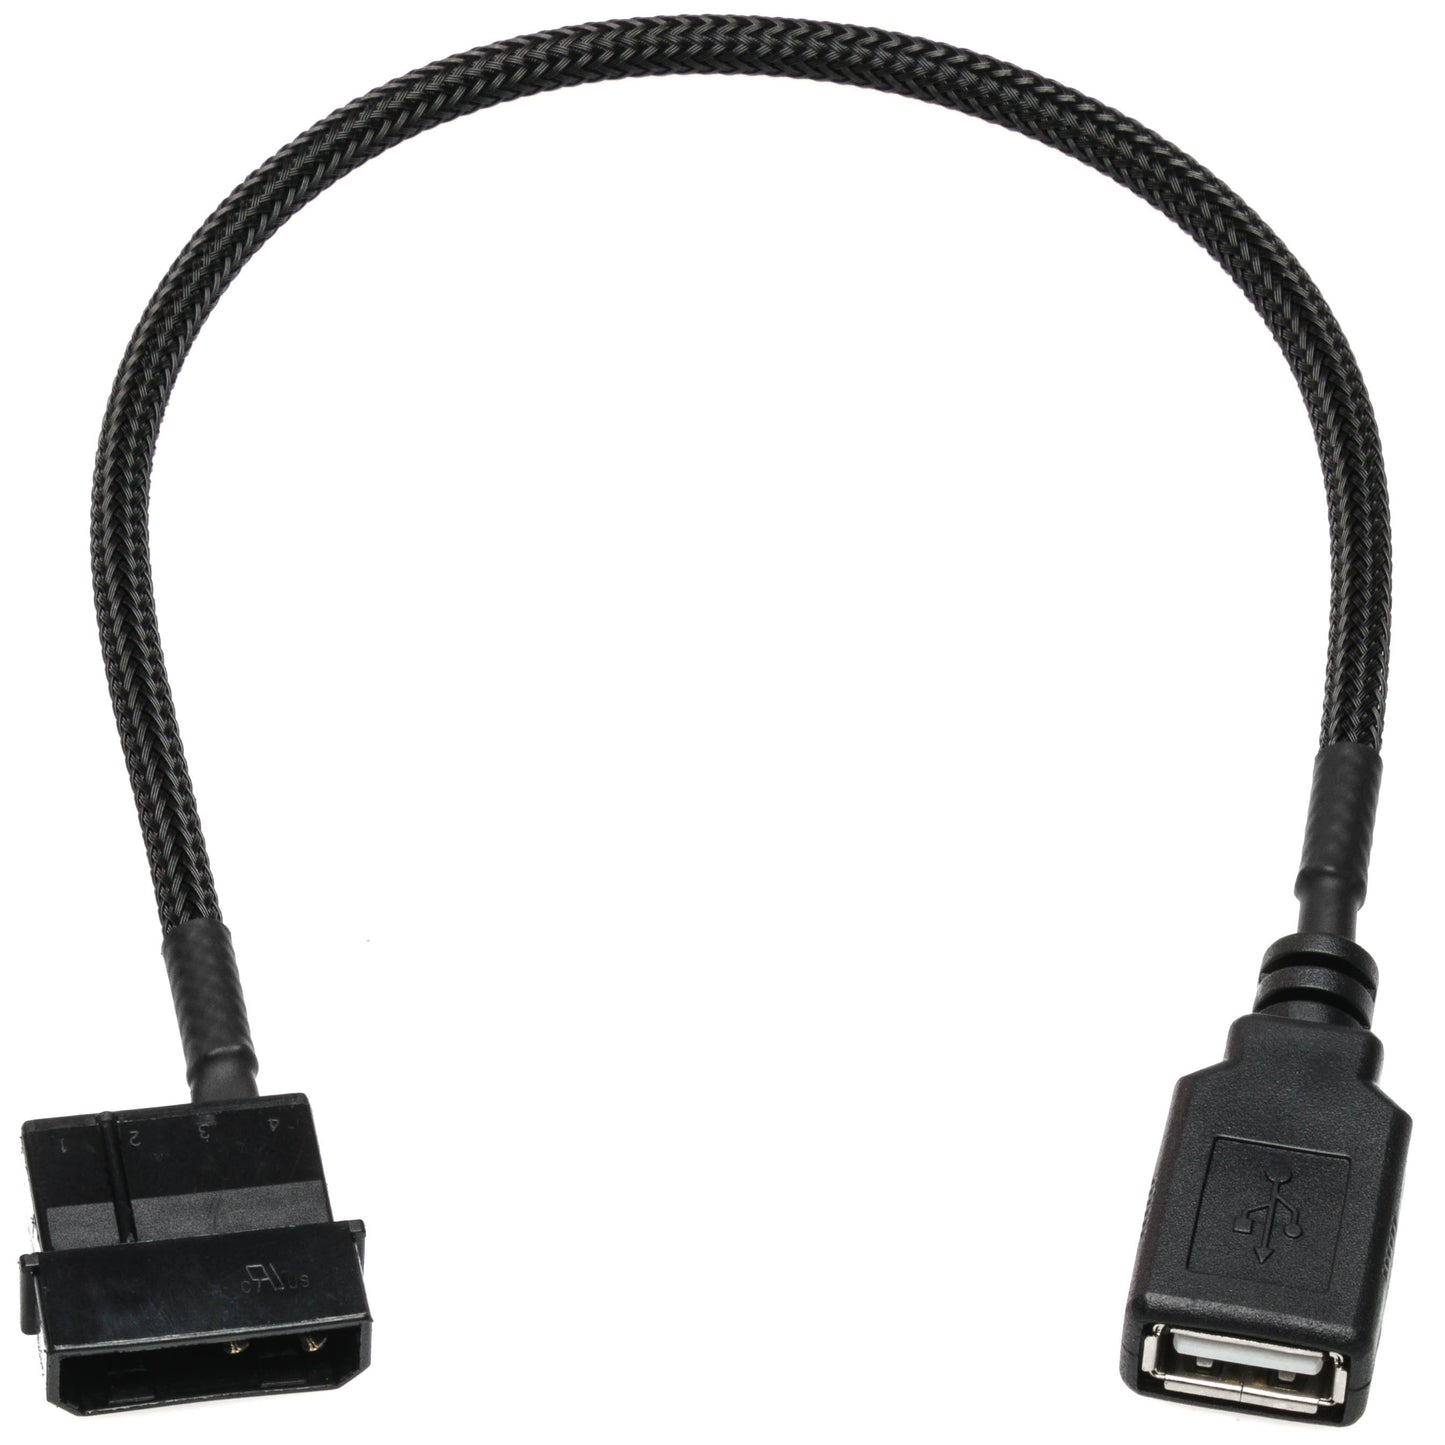 4-Pin Molex to Female USB 5V Power Adapter Cable